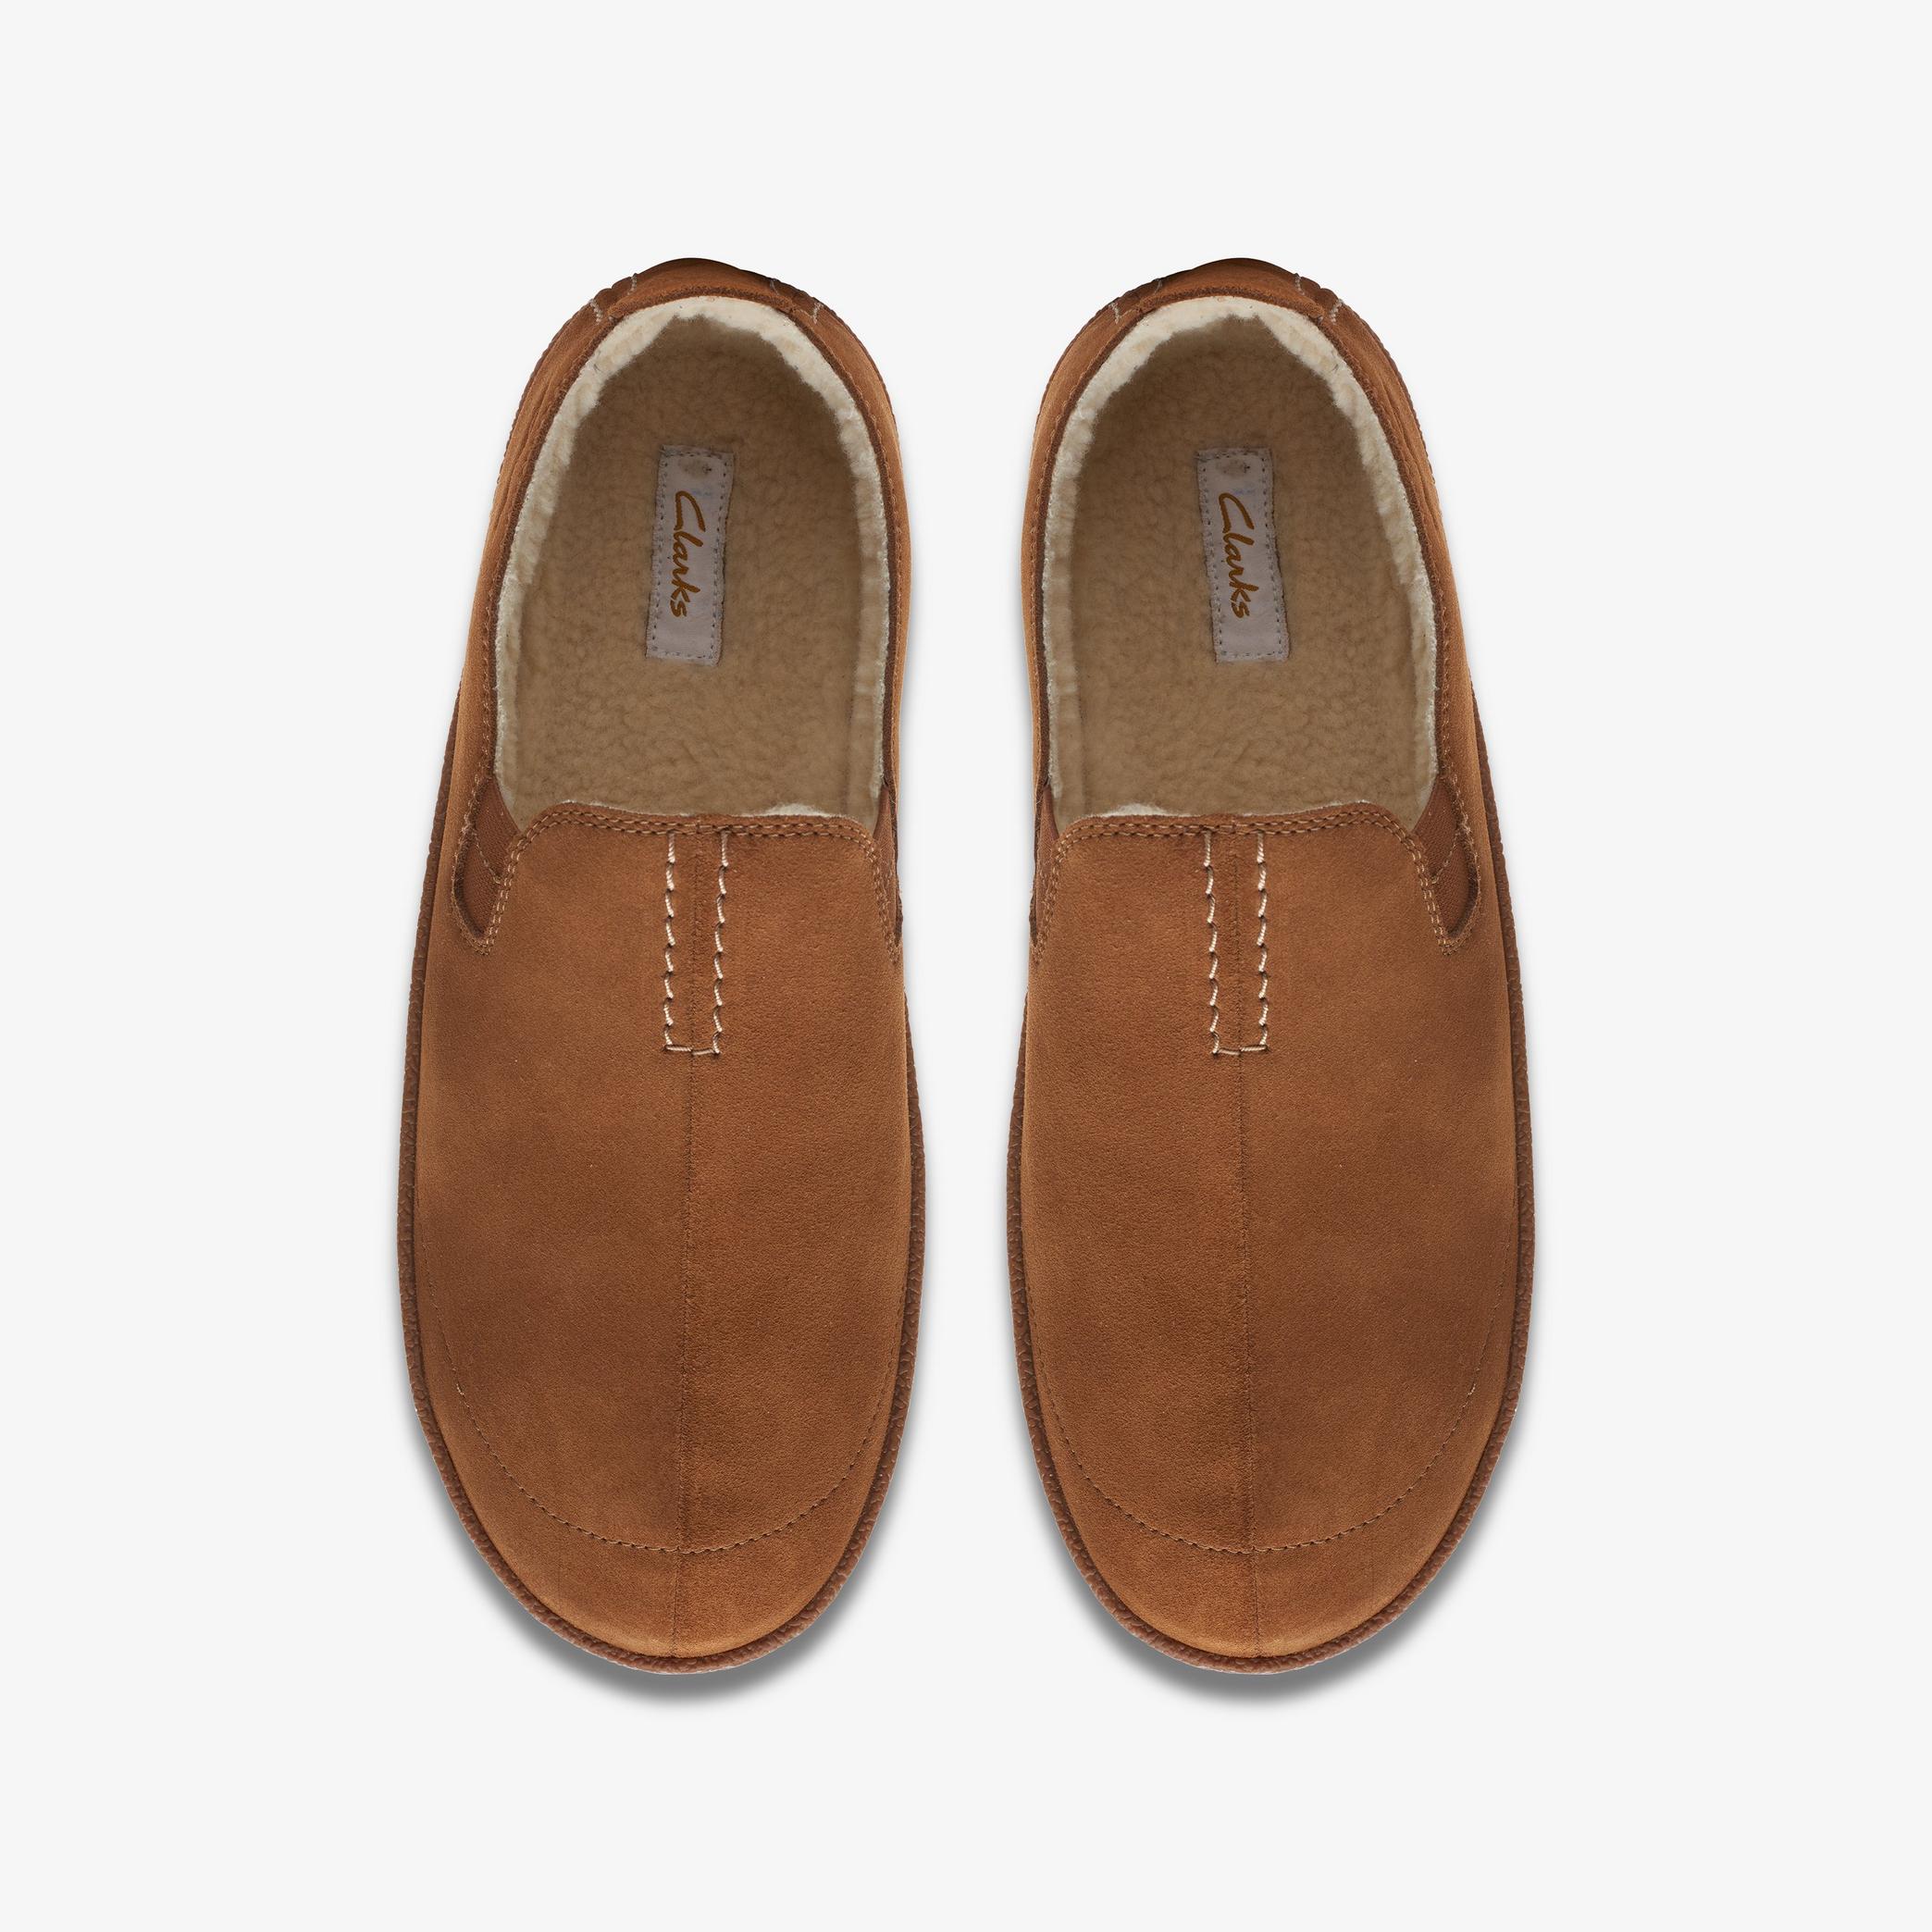 Home Mocc Tan Suede Slippers, view 6 of 6